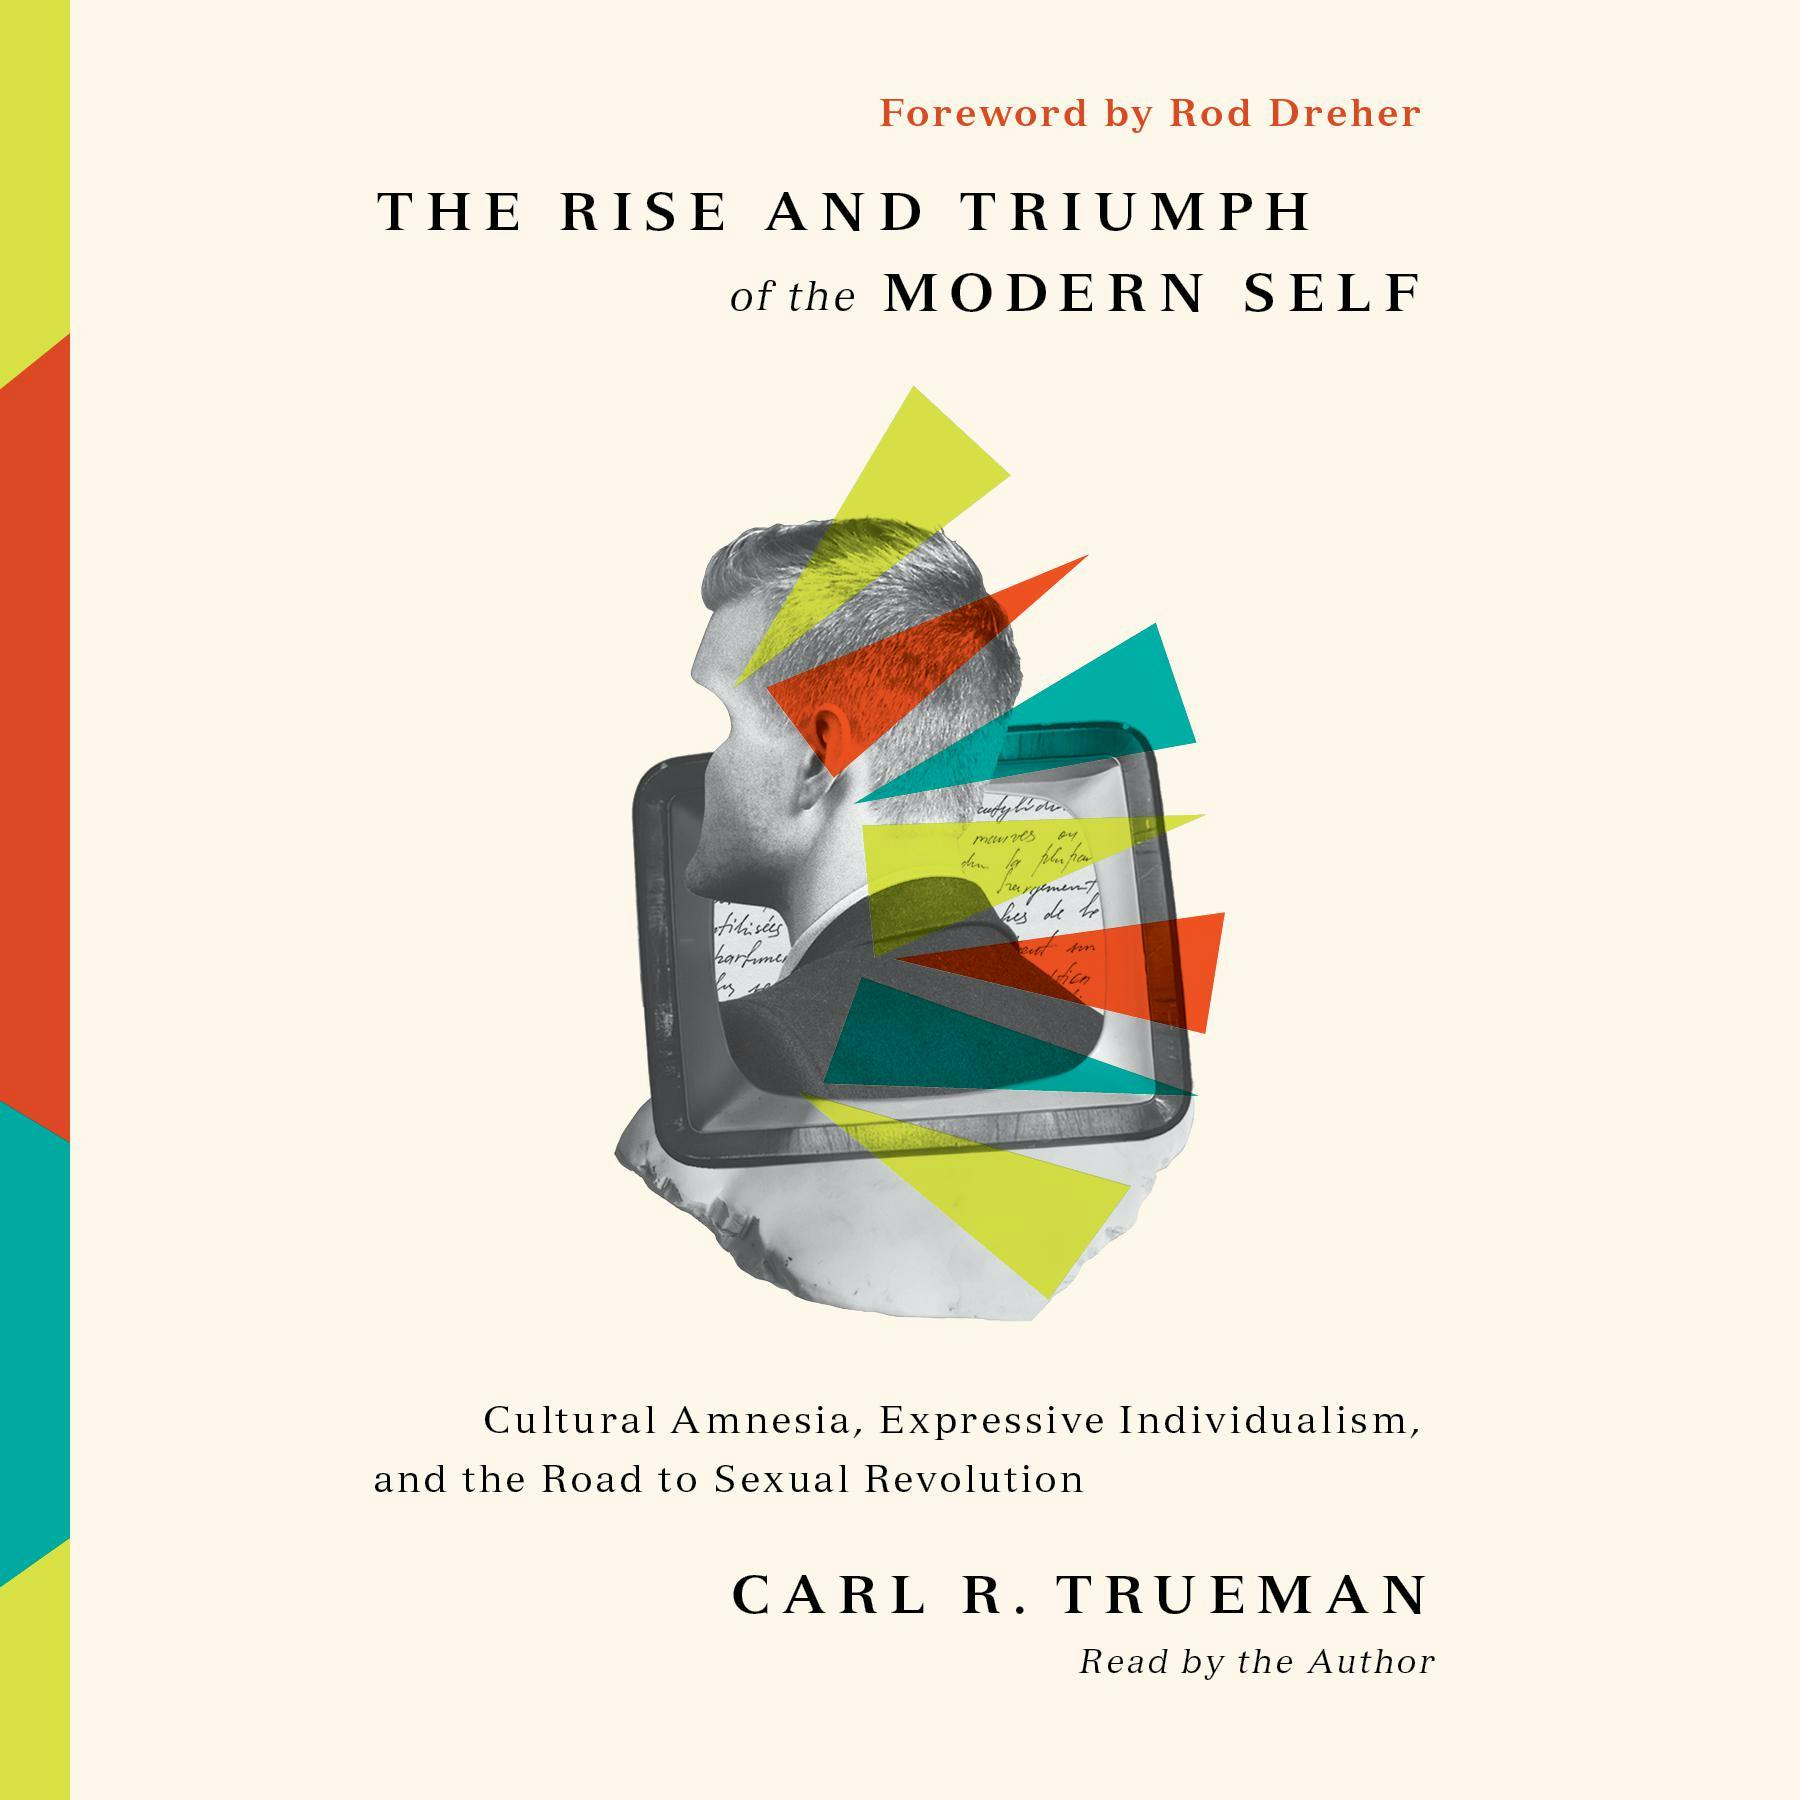 The Rise and Triumph of the Modern Self: Cultural Amnesia, Expressive Individualism, and the Road to Sexual Revolution - Carl R. Trueman, Rod Dreher